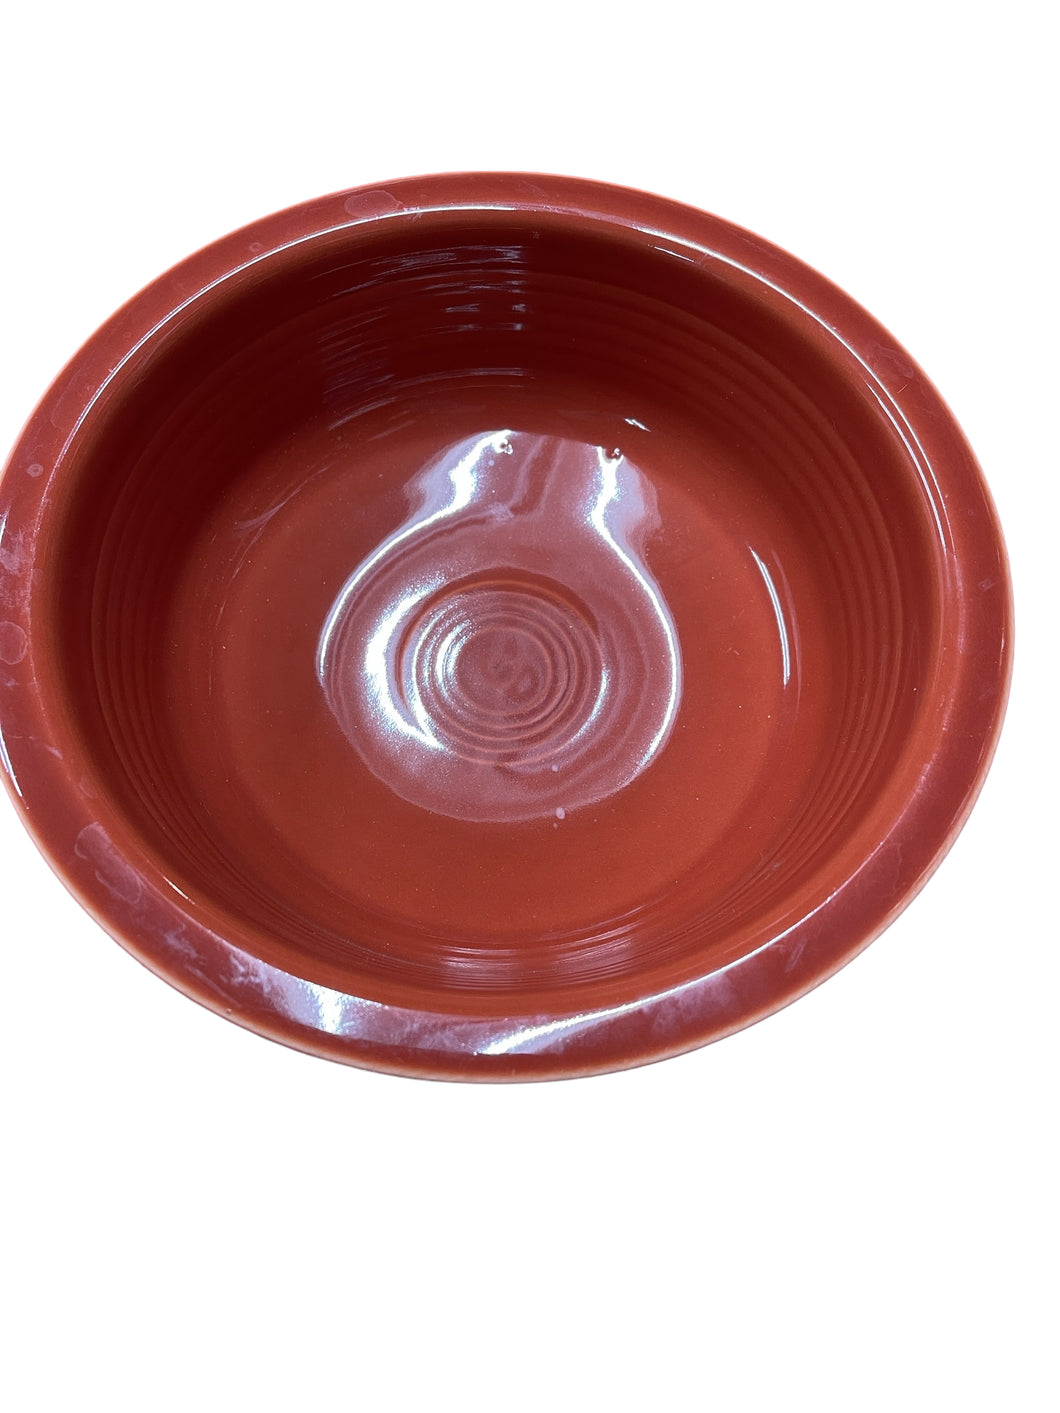 Fiesta Medium  Cereal Bowl ( The one in the Set ) Paprika 19oz